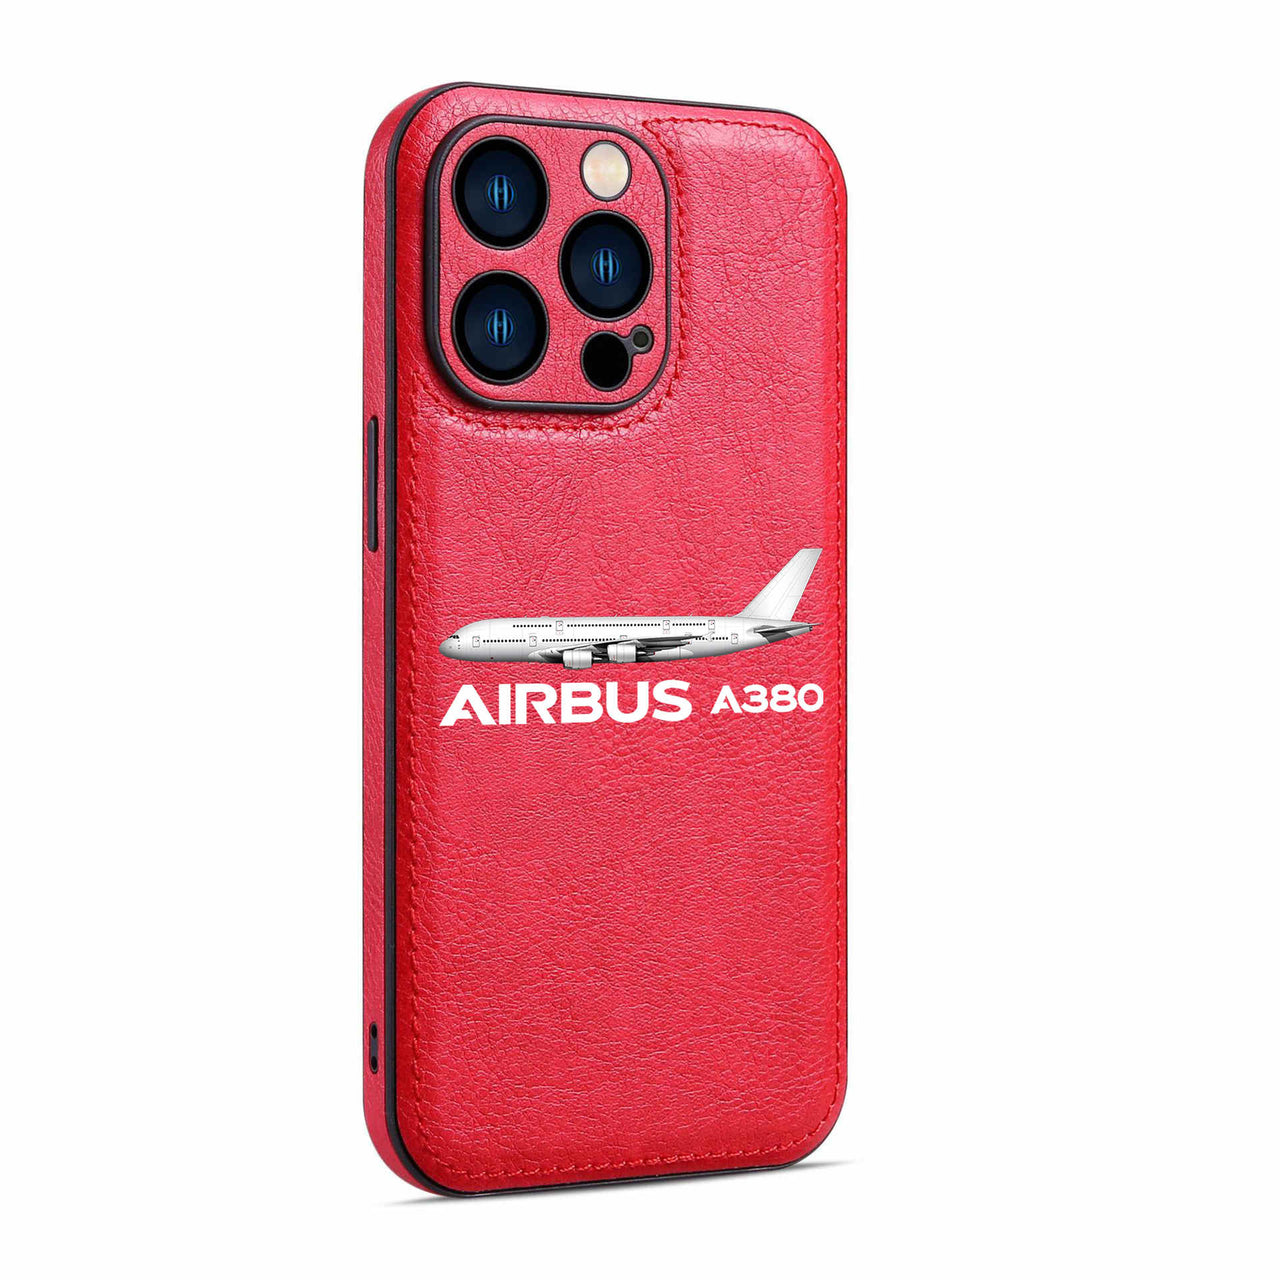 The Airbus A380 Designed Leather iPhone Cases